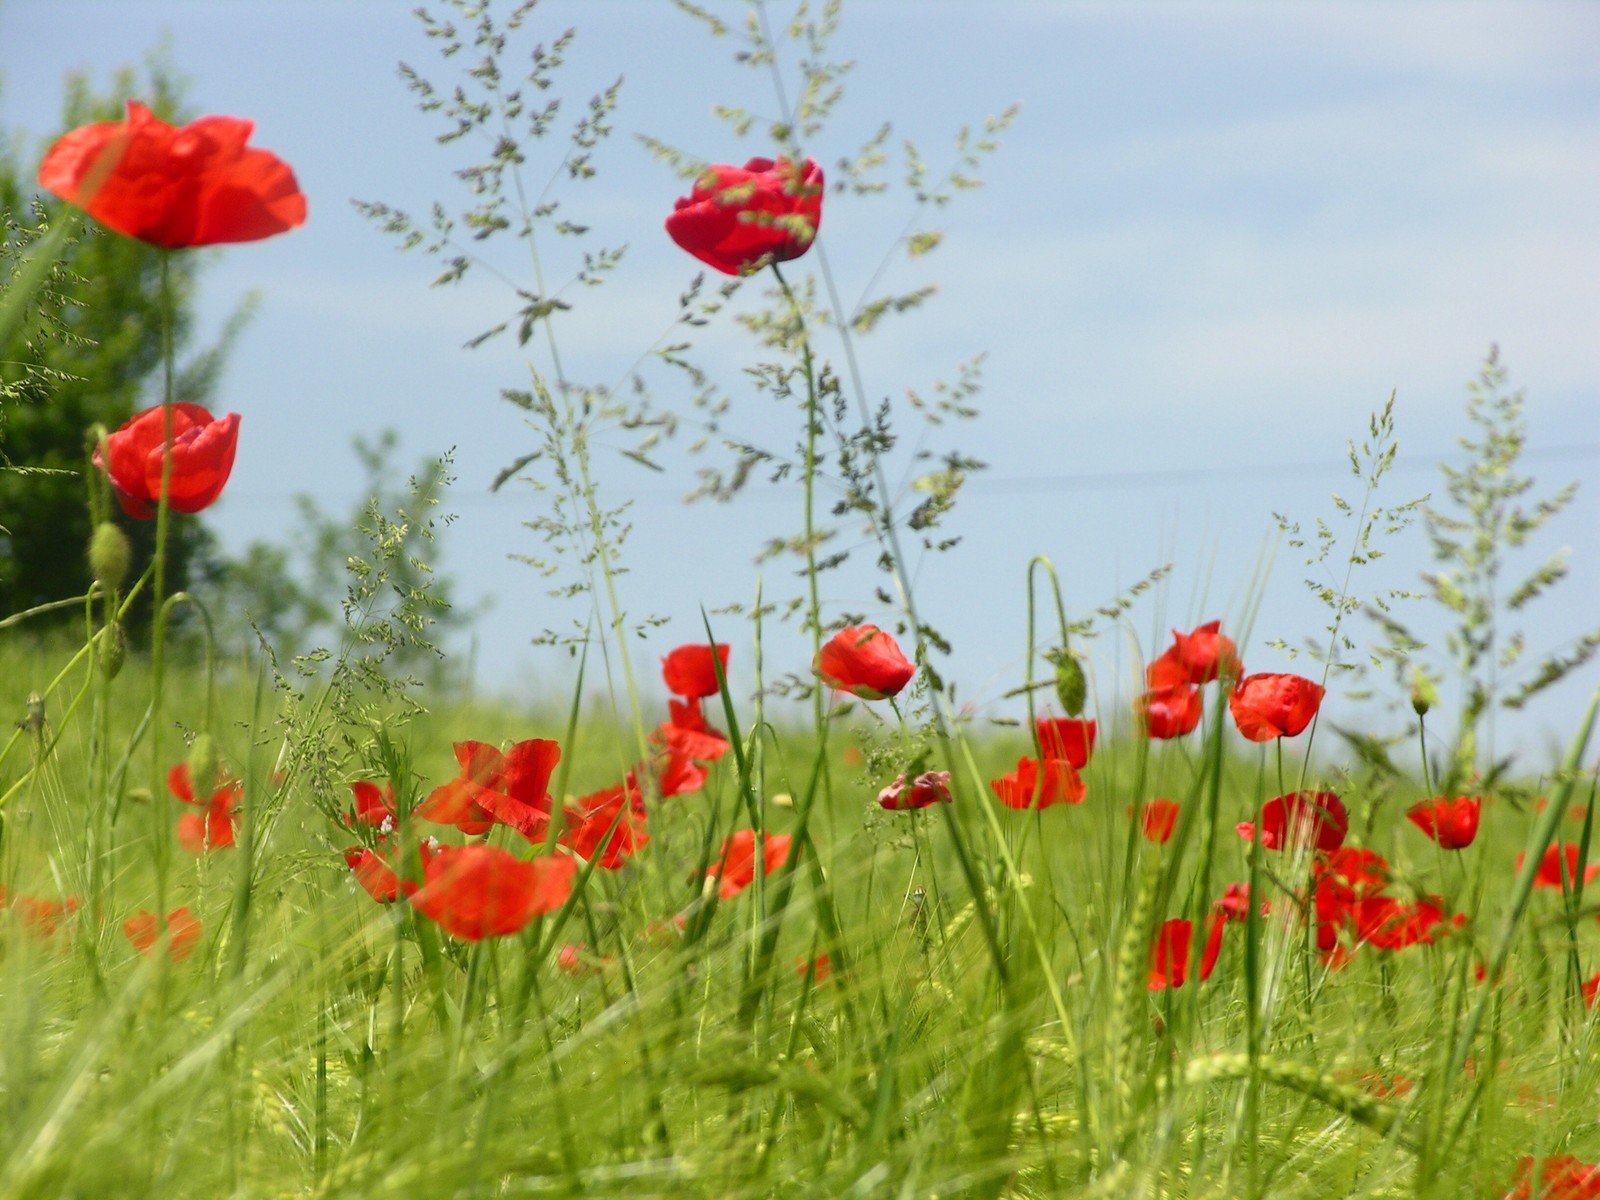 an open field of wild flowers with red poppies